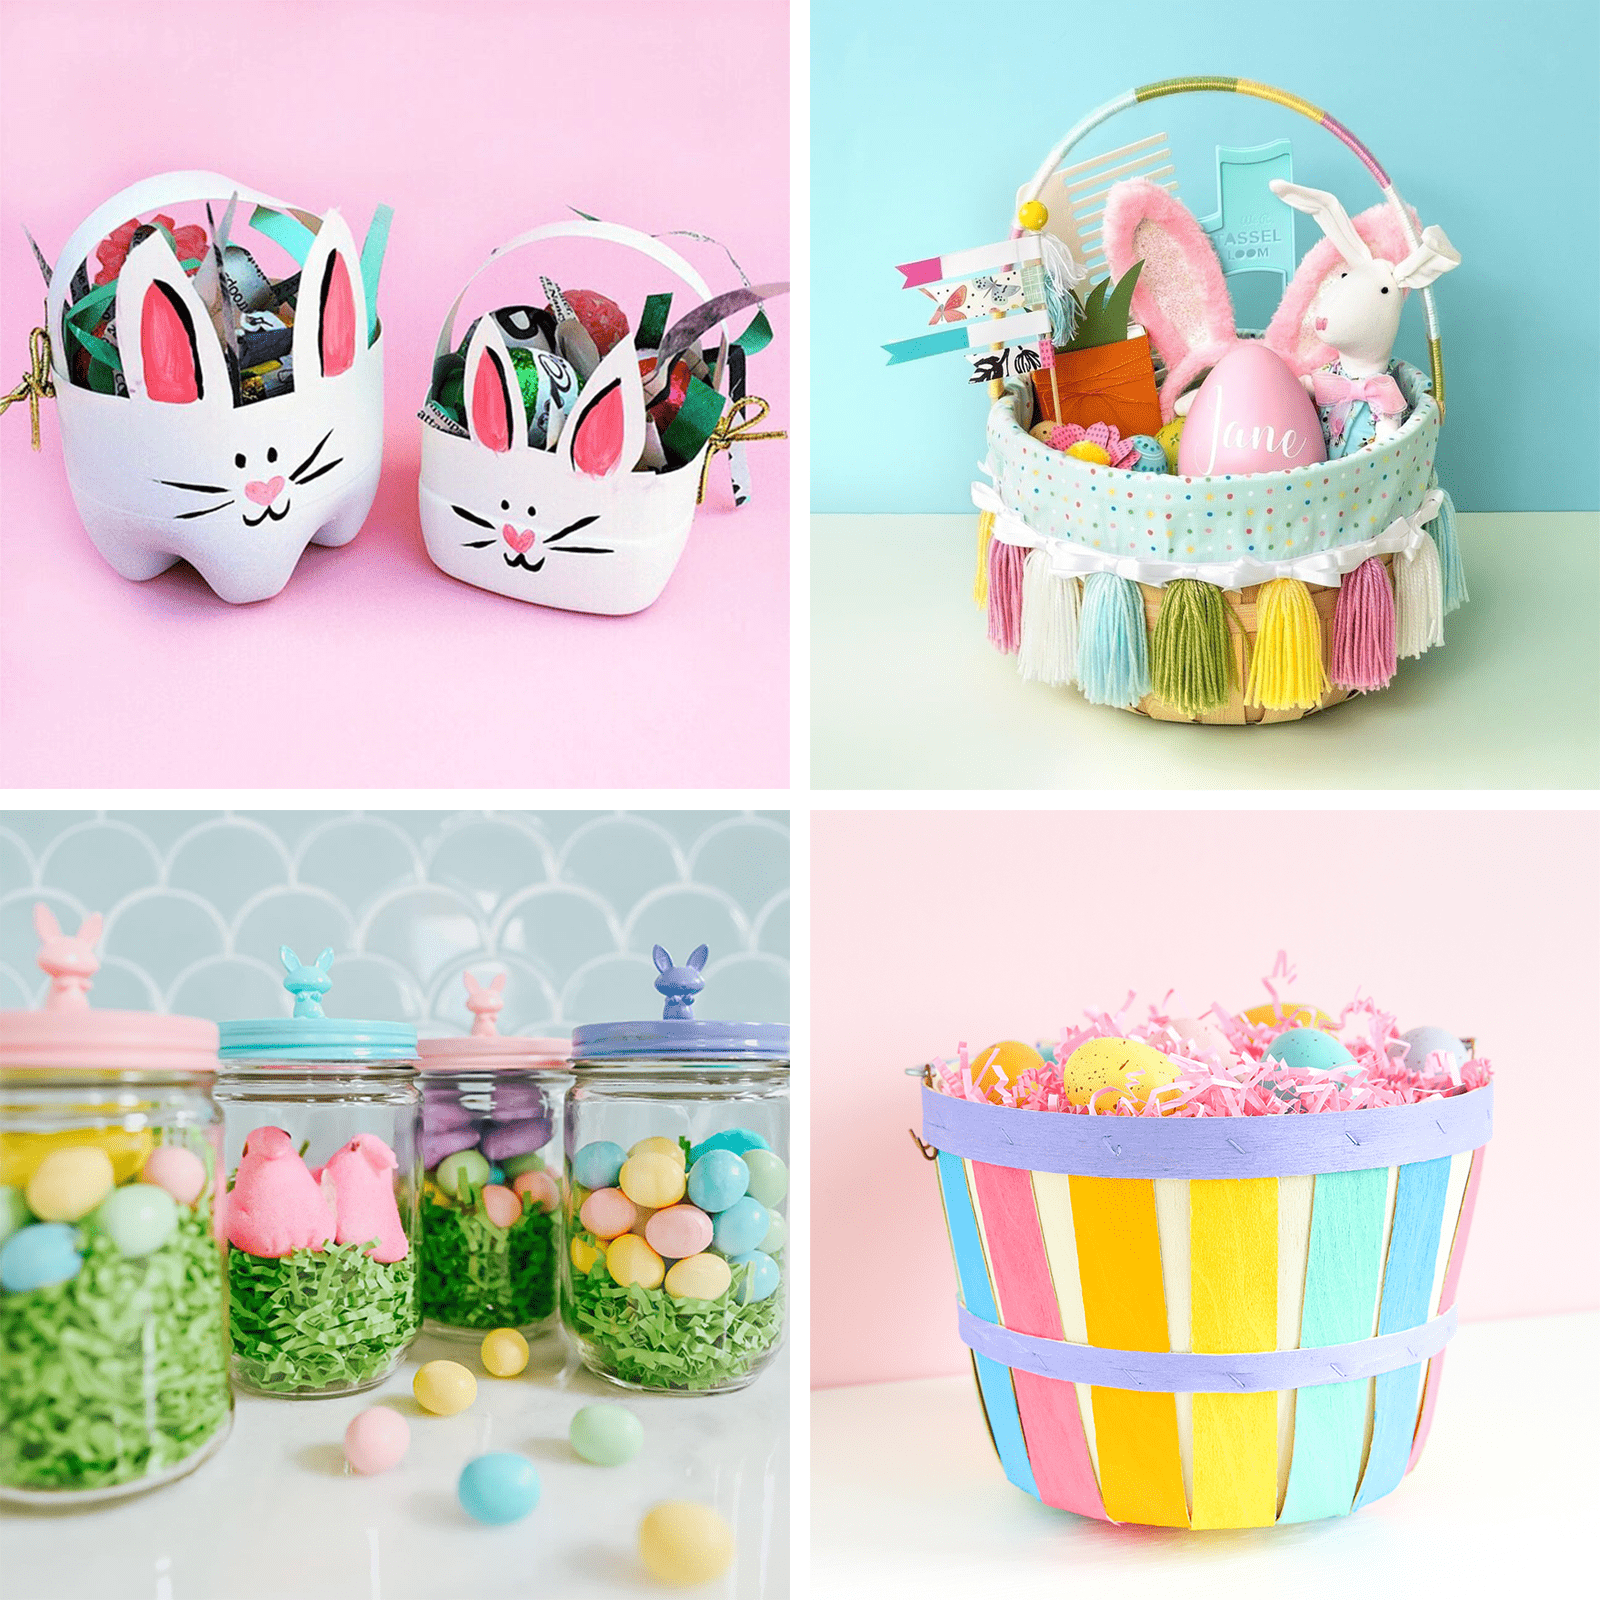 https://www.rd.com/wp-content/uploads/2020/04/45-creative-easter-basket-ideas-that-are-colorful-and-fun-ft-courtesy.png